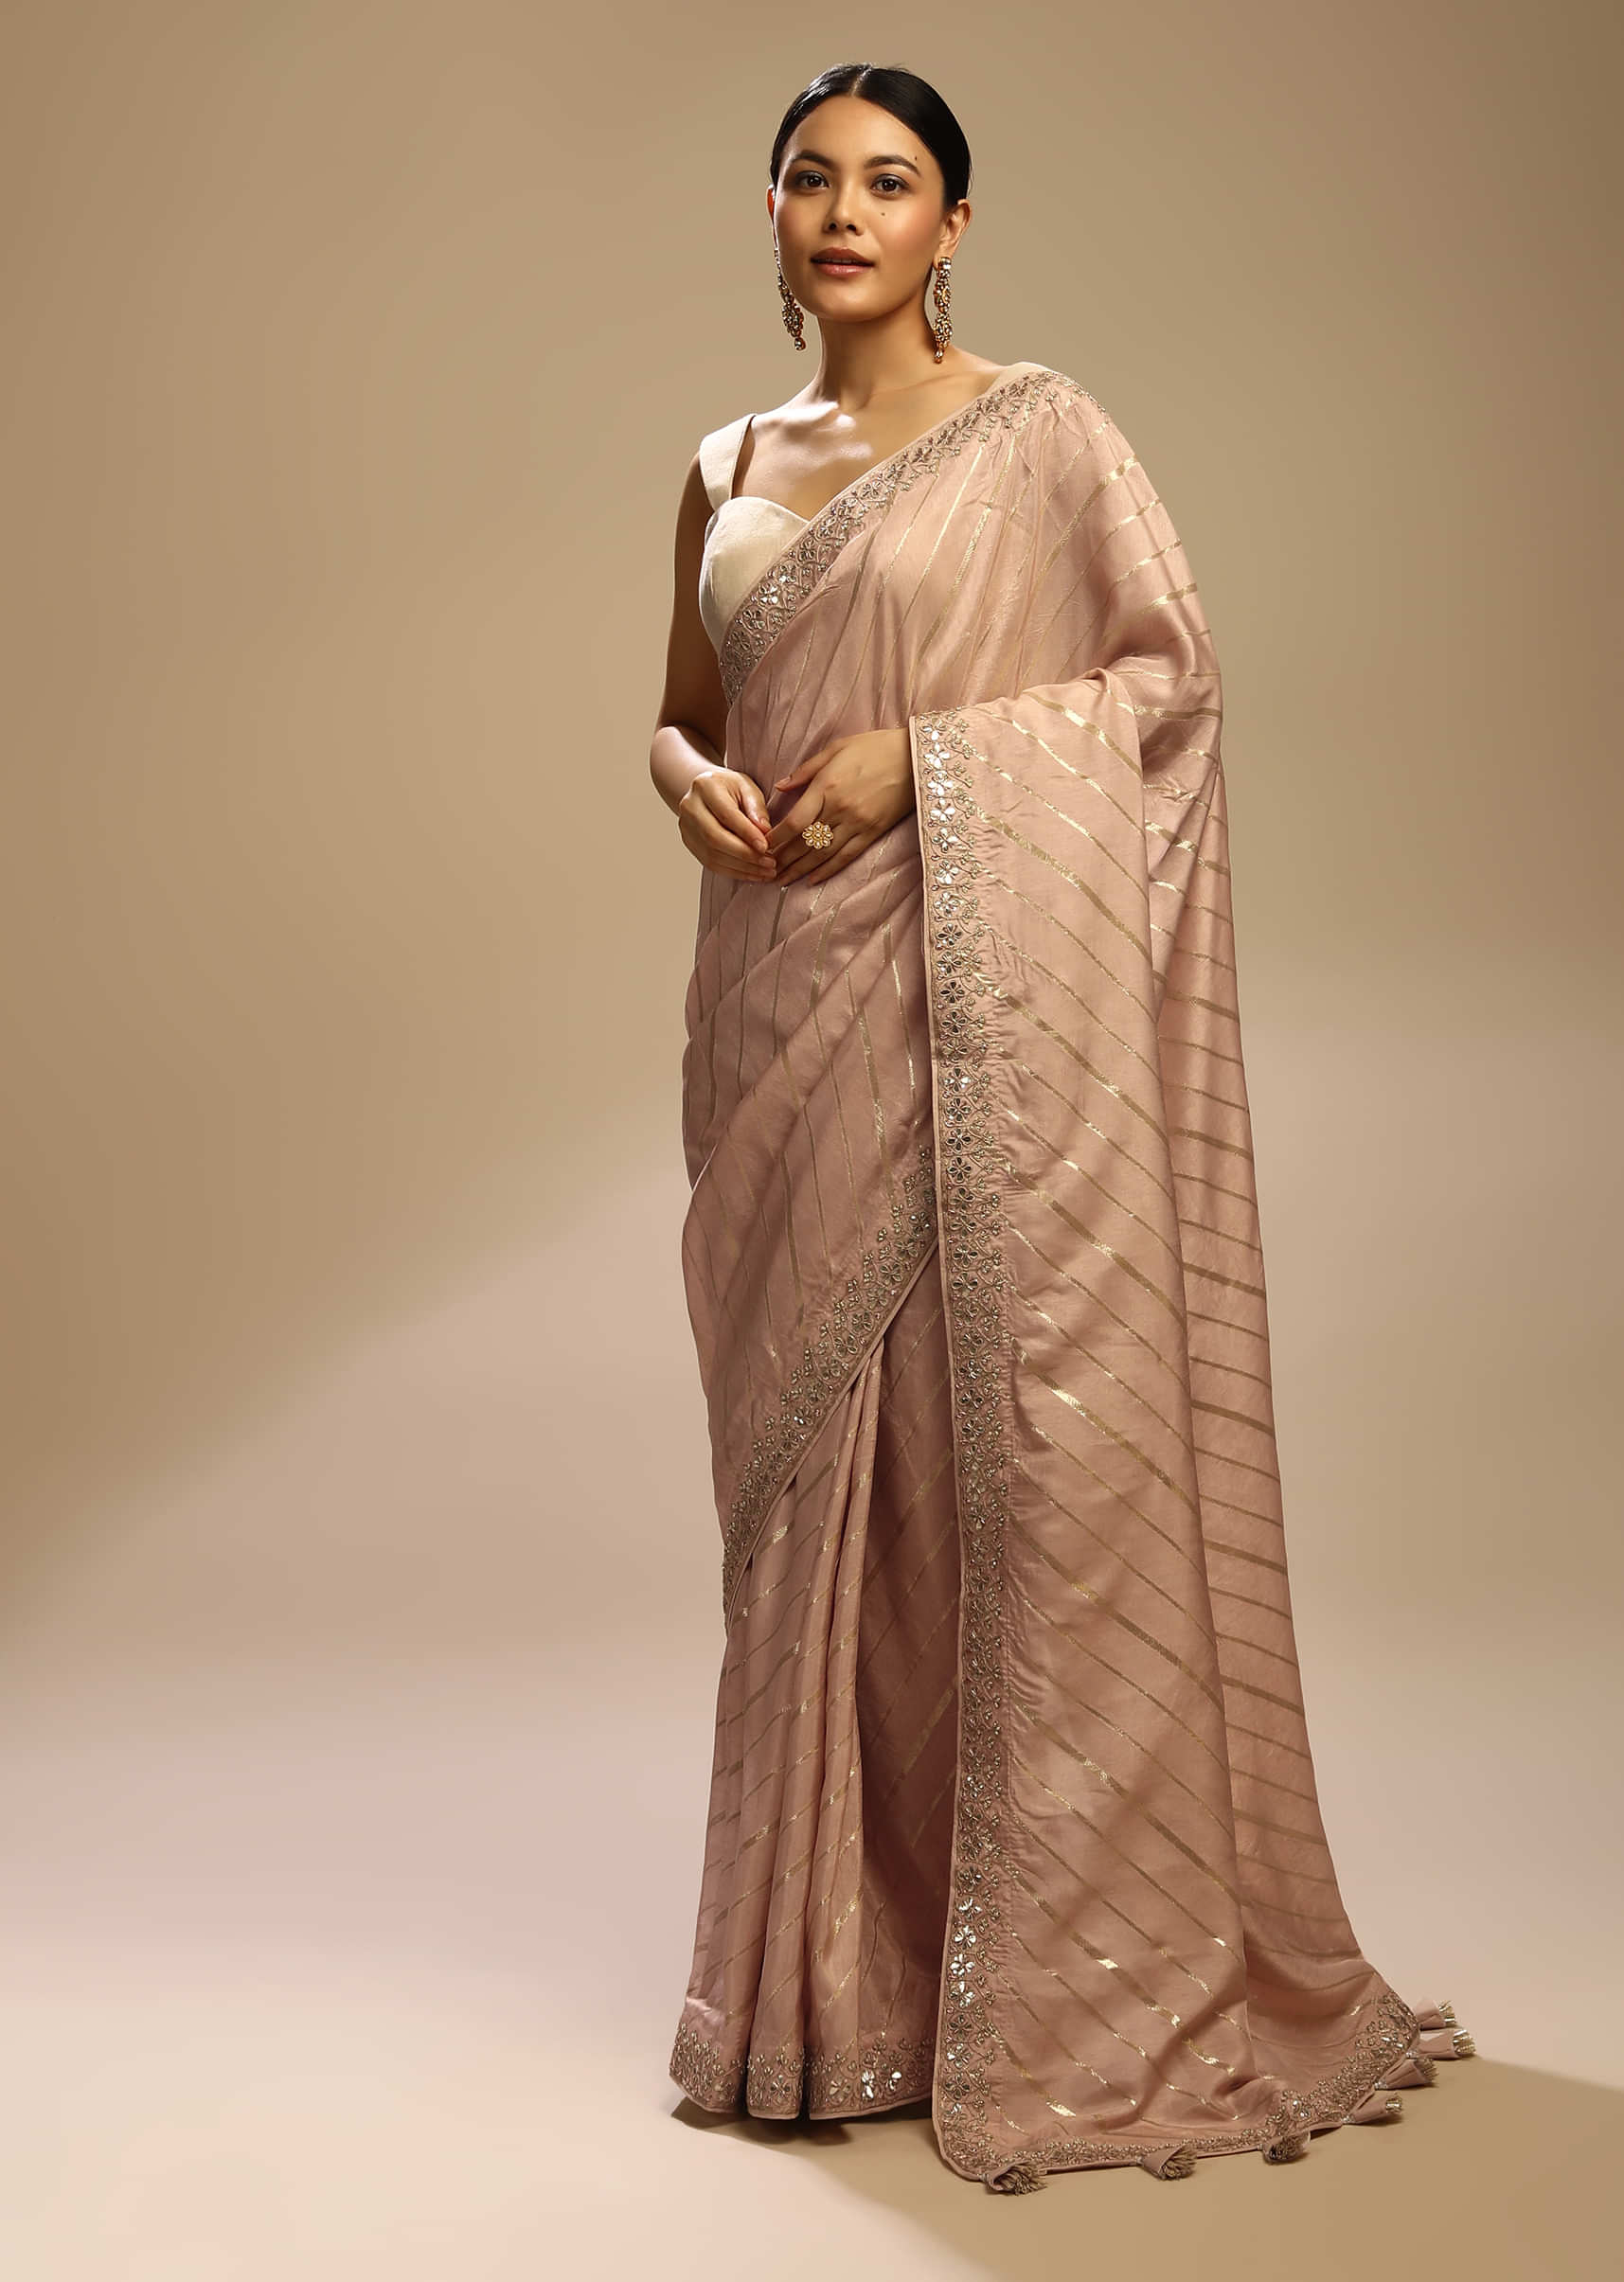 Peach Whip Saree In Dupion Silk With Woven Diagonal Stripes And Gotta Embroidered Floral Border